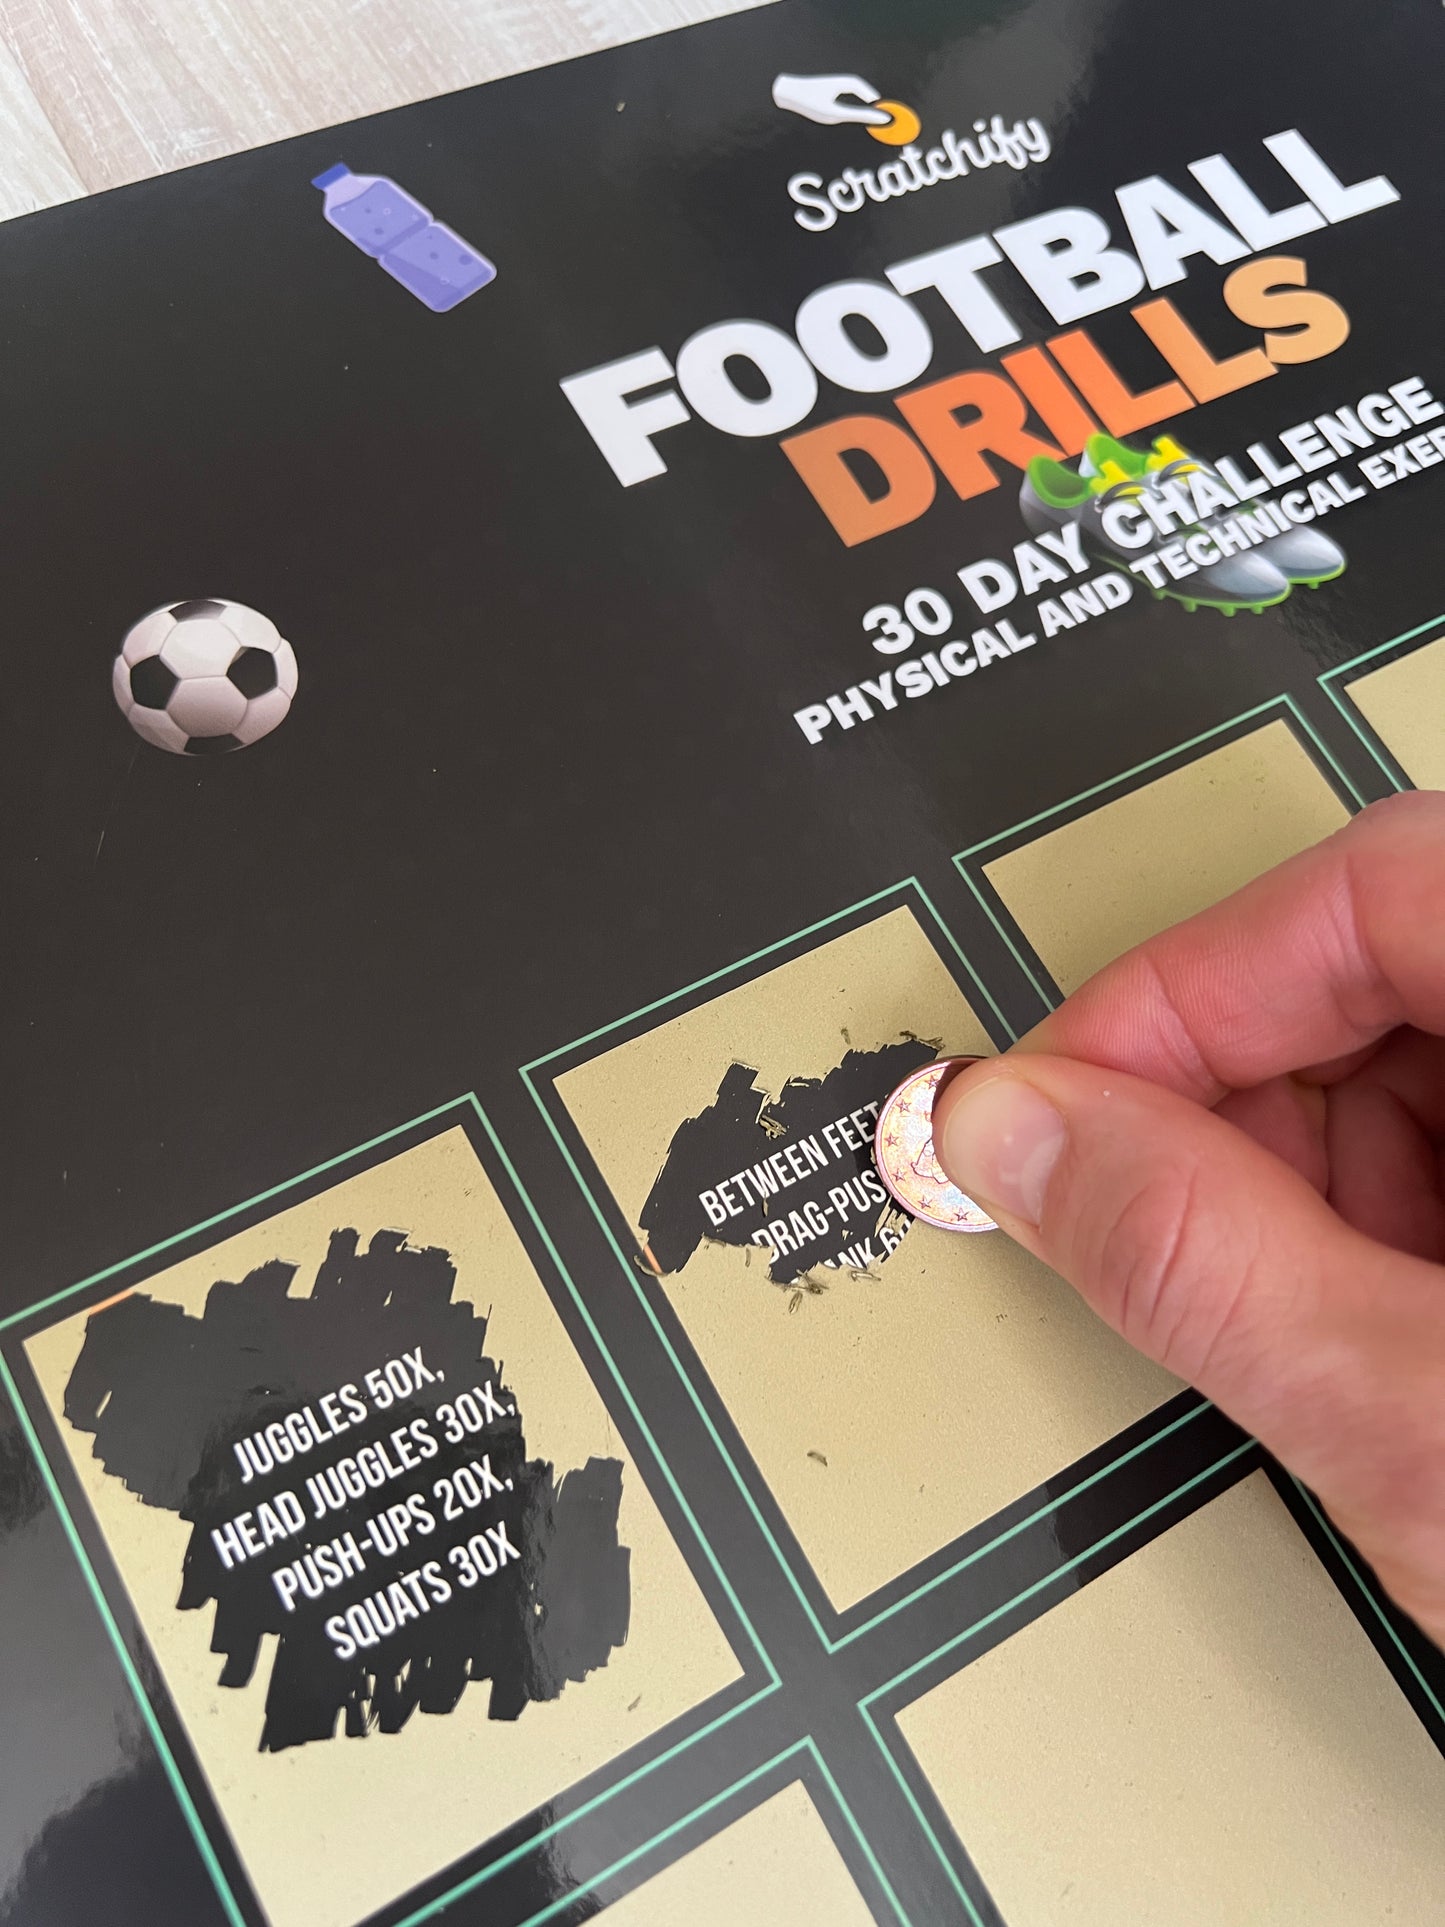 Football Drills - 30 DAY Challenge, Physcial and Technical exercises